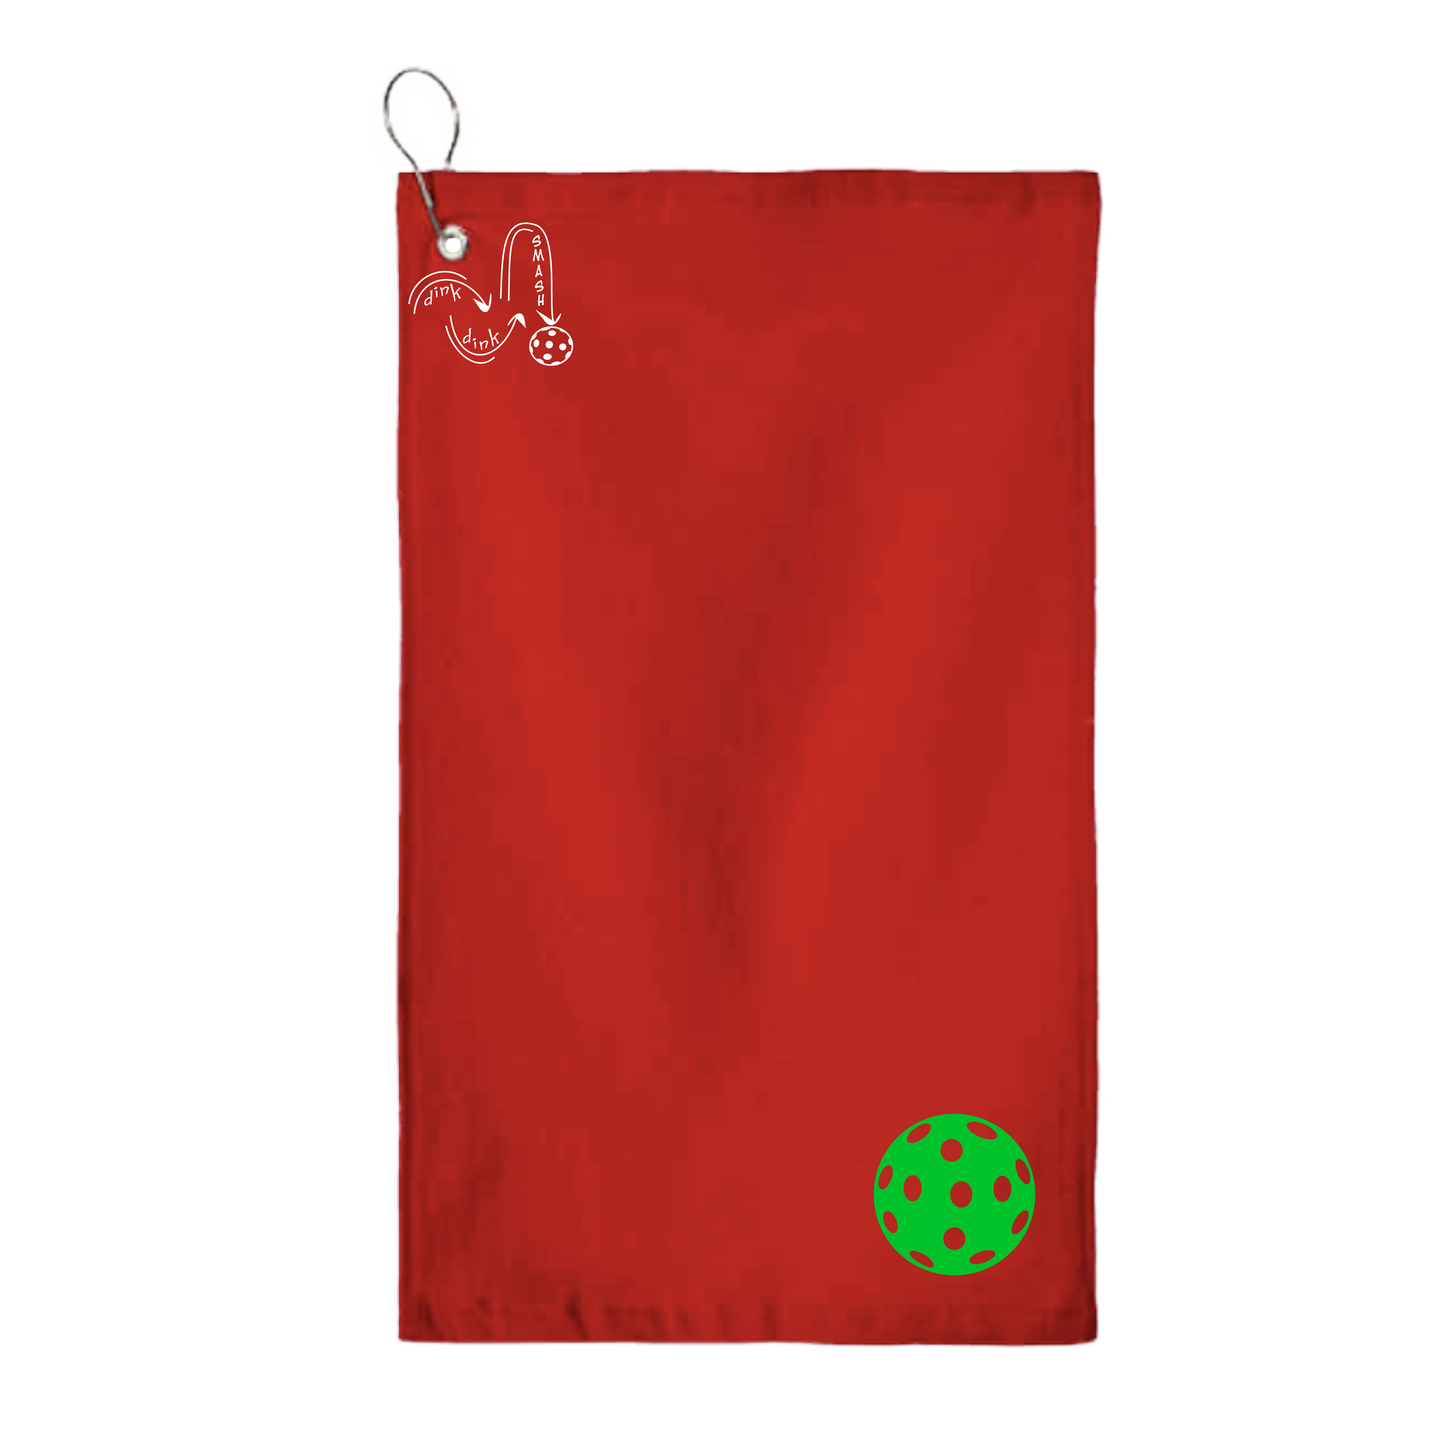 Pickleballs (Customizable) | Pickleball Court Towels | Grommeted 100% Cotton Terry Velour